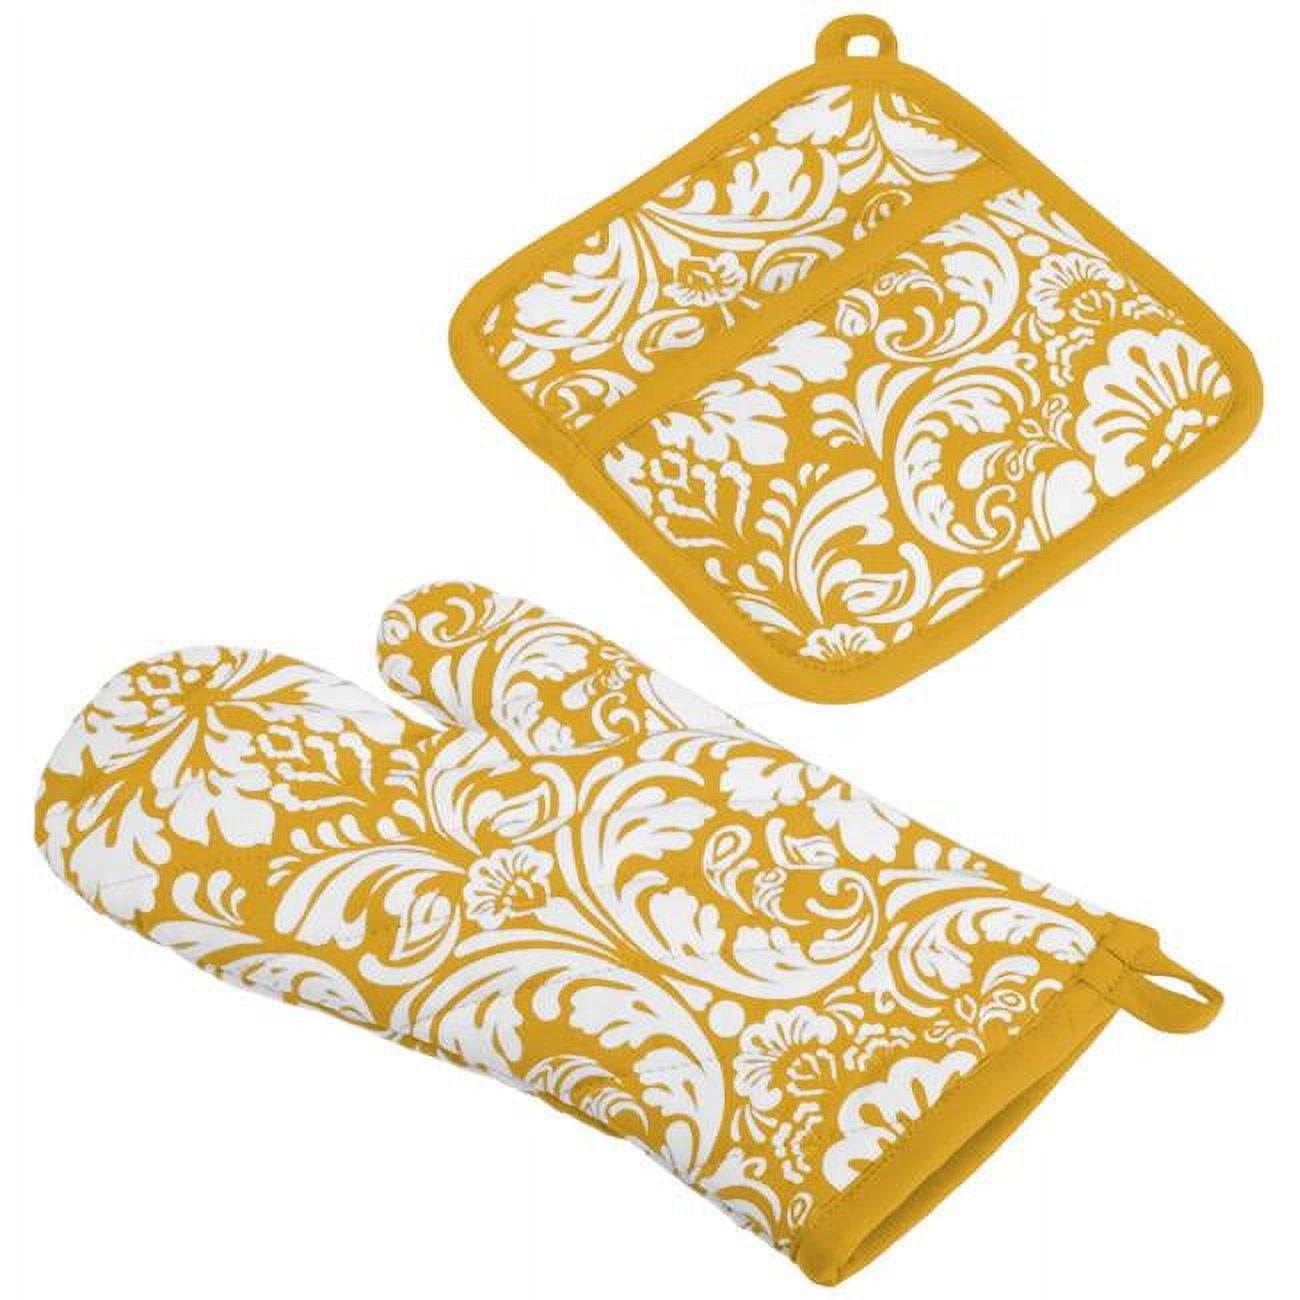 Boho Paisley Gold Oven Mitts and Pot Holders Sets